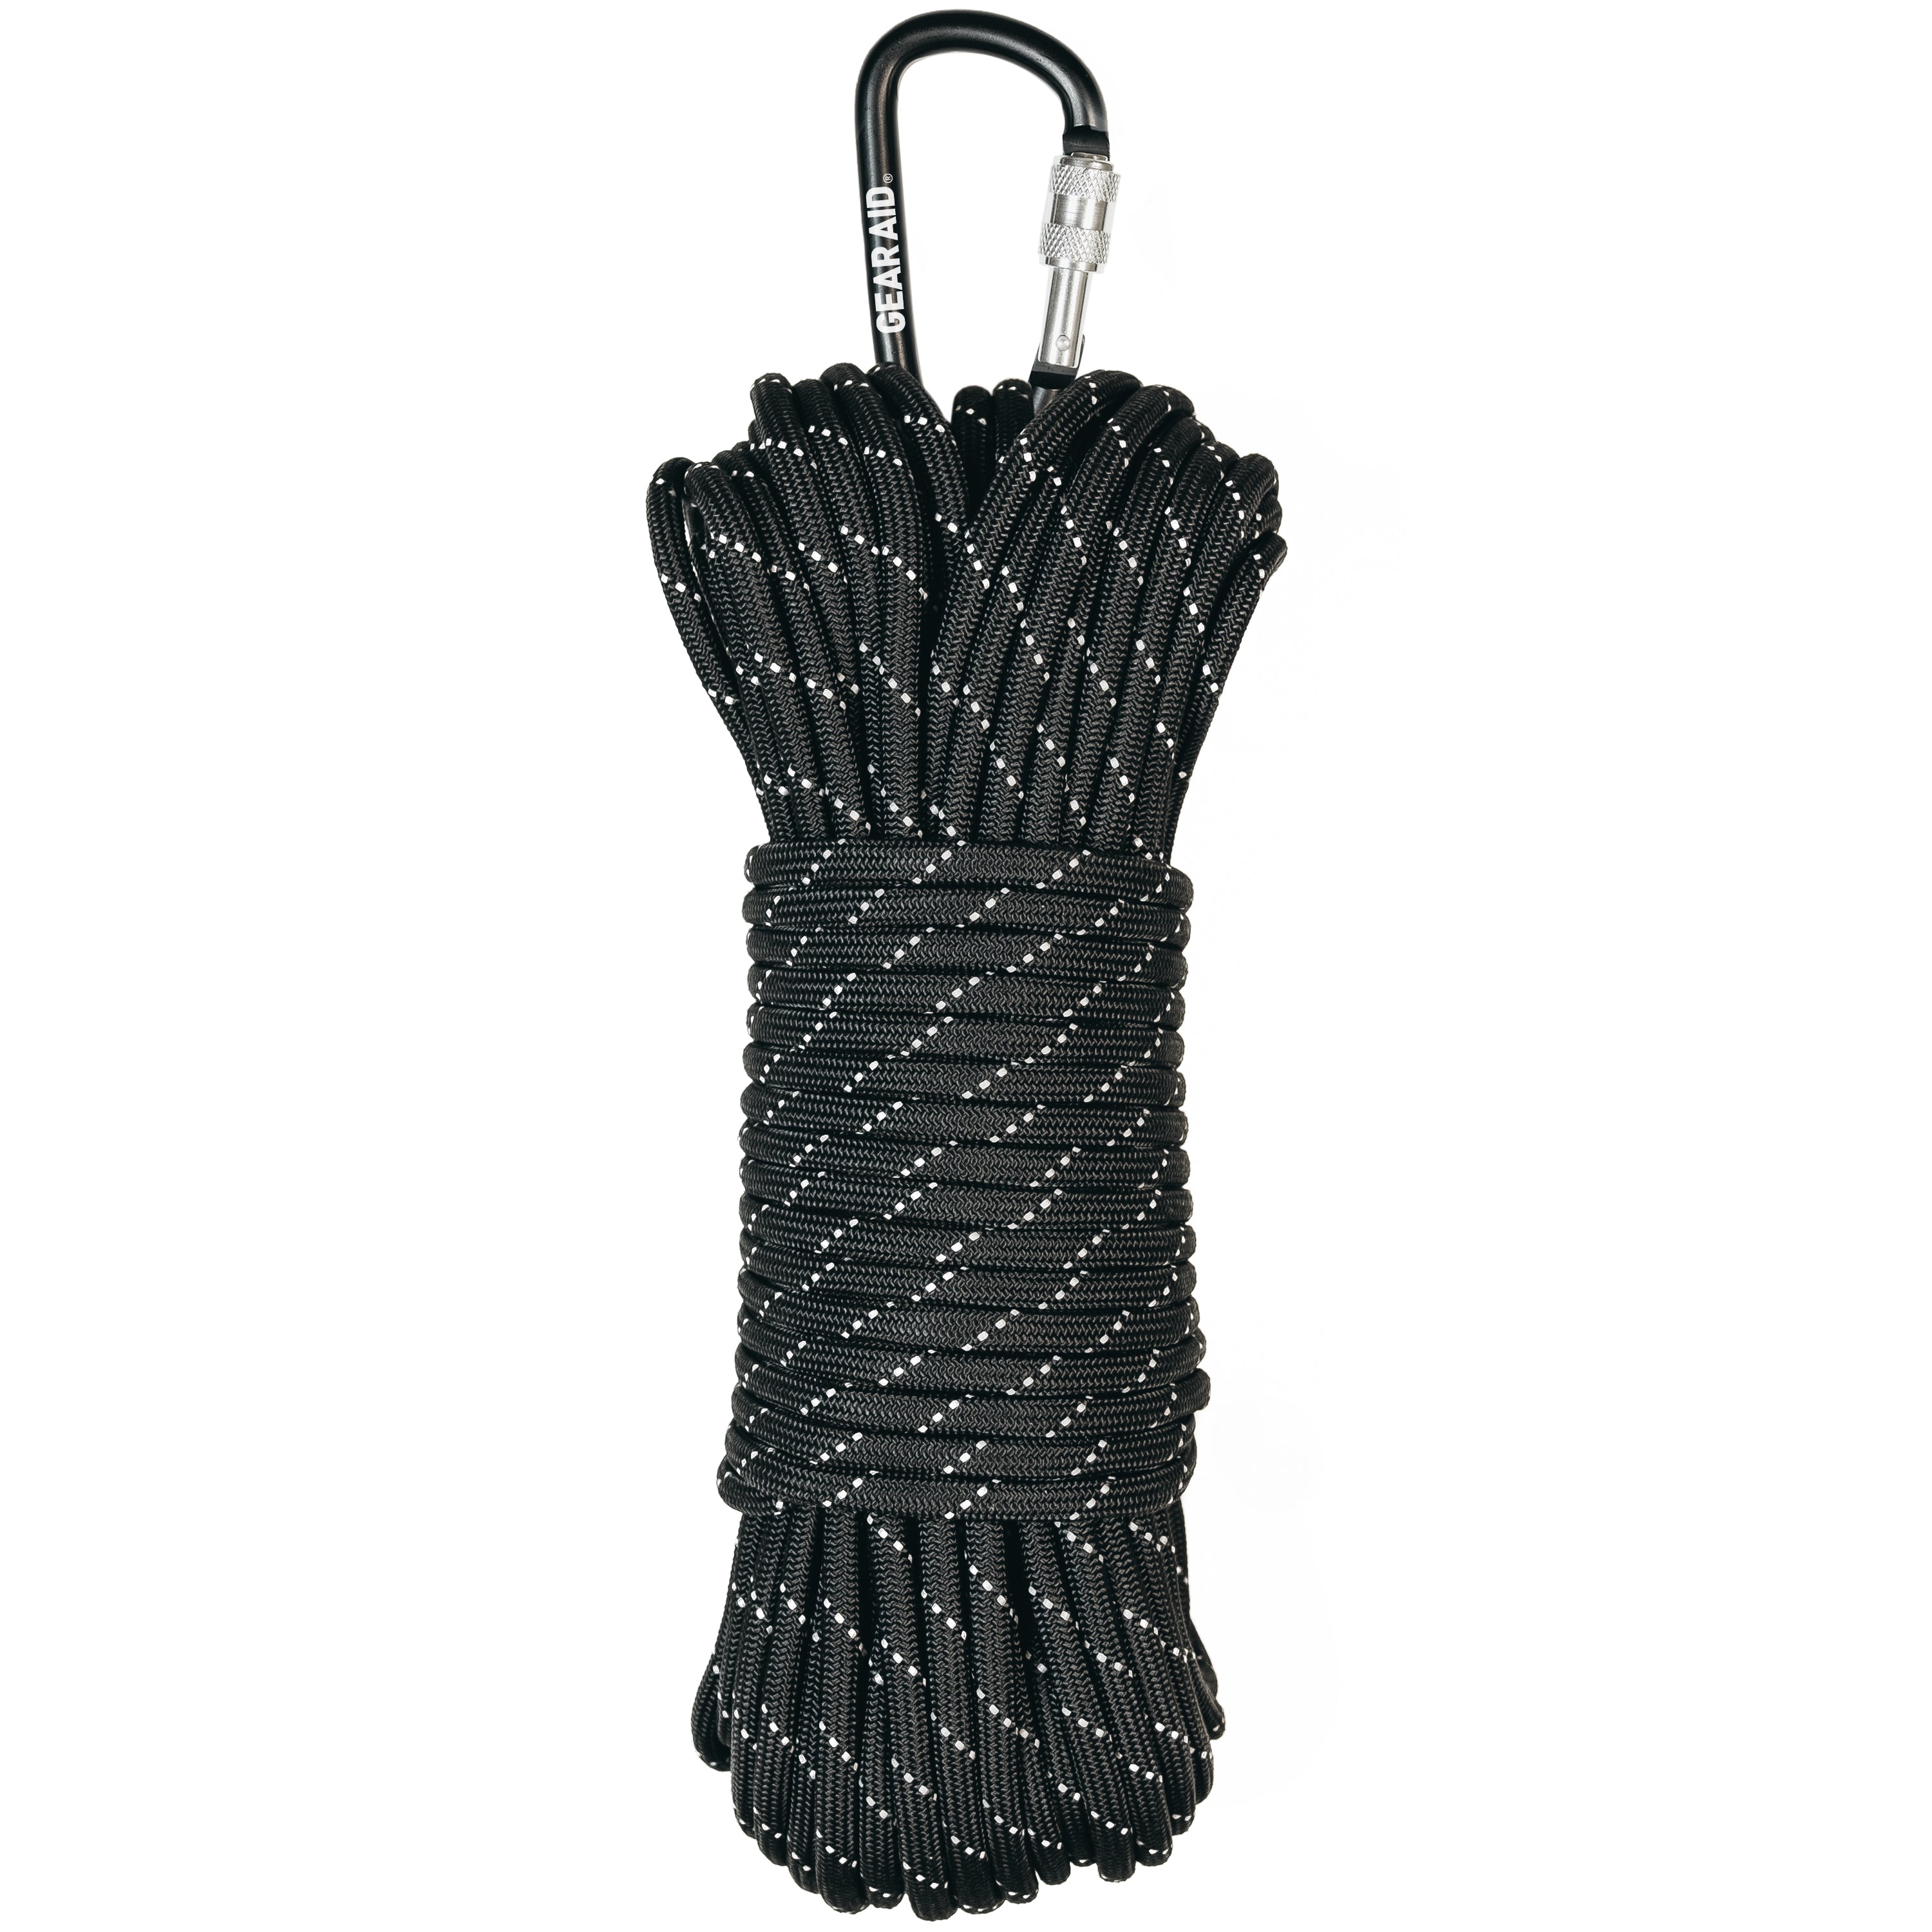 Buy Different Paracord Tools from The Paracord Store